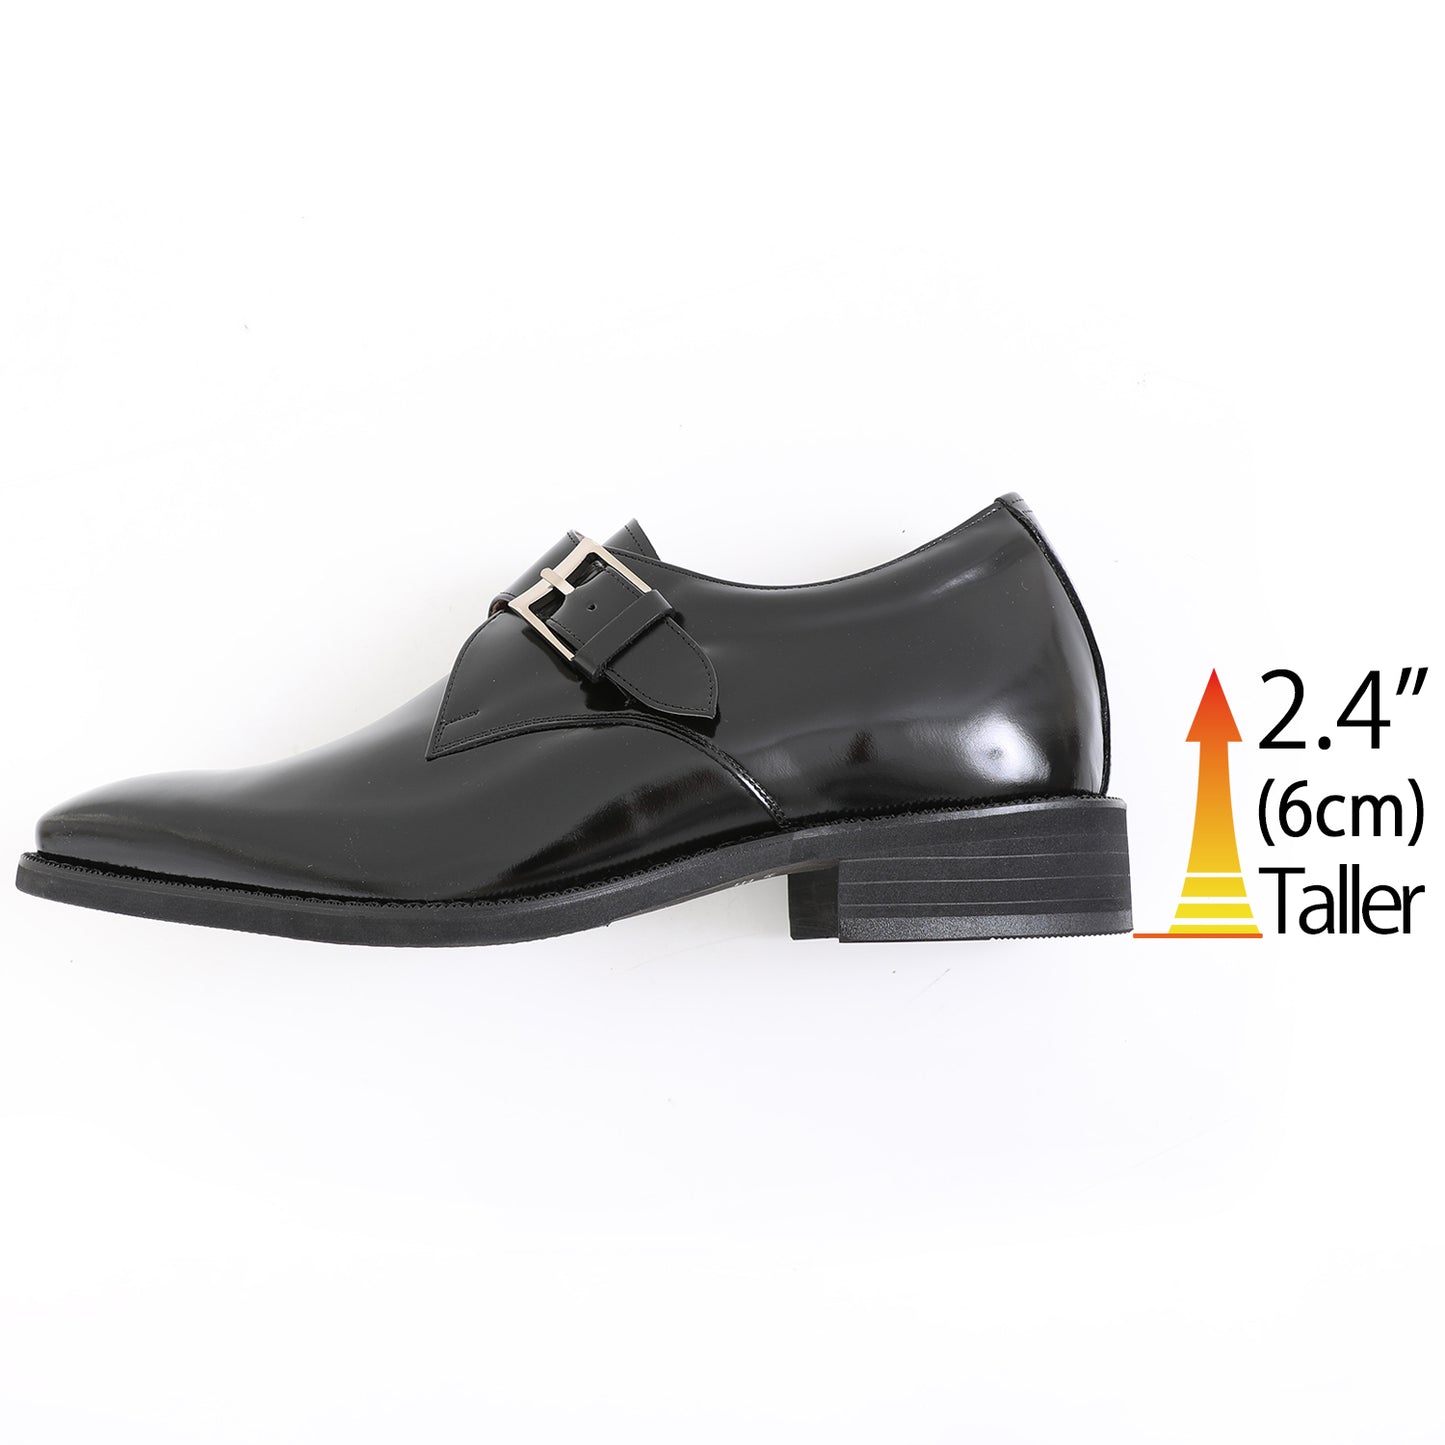 Men's Elevator Shoes Height Increasing 2.36" Taller Oxford Plain Toe Single Monk Strap Slip on Loafers Genuine Leather No. 1925